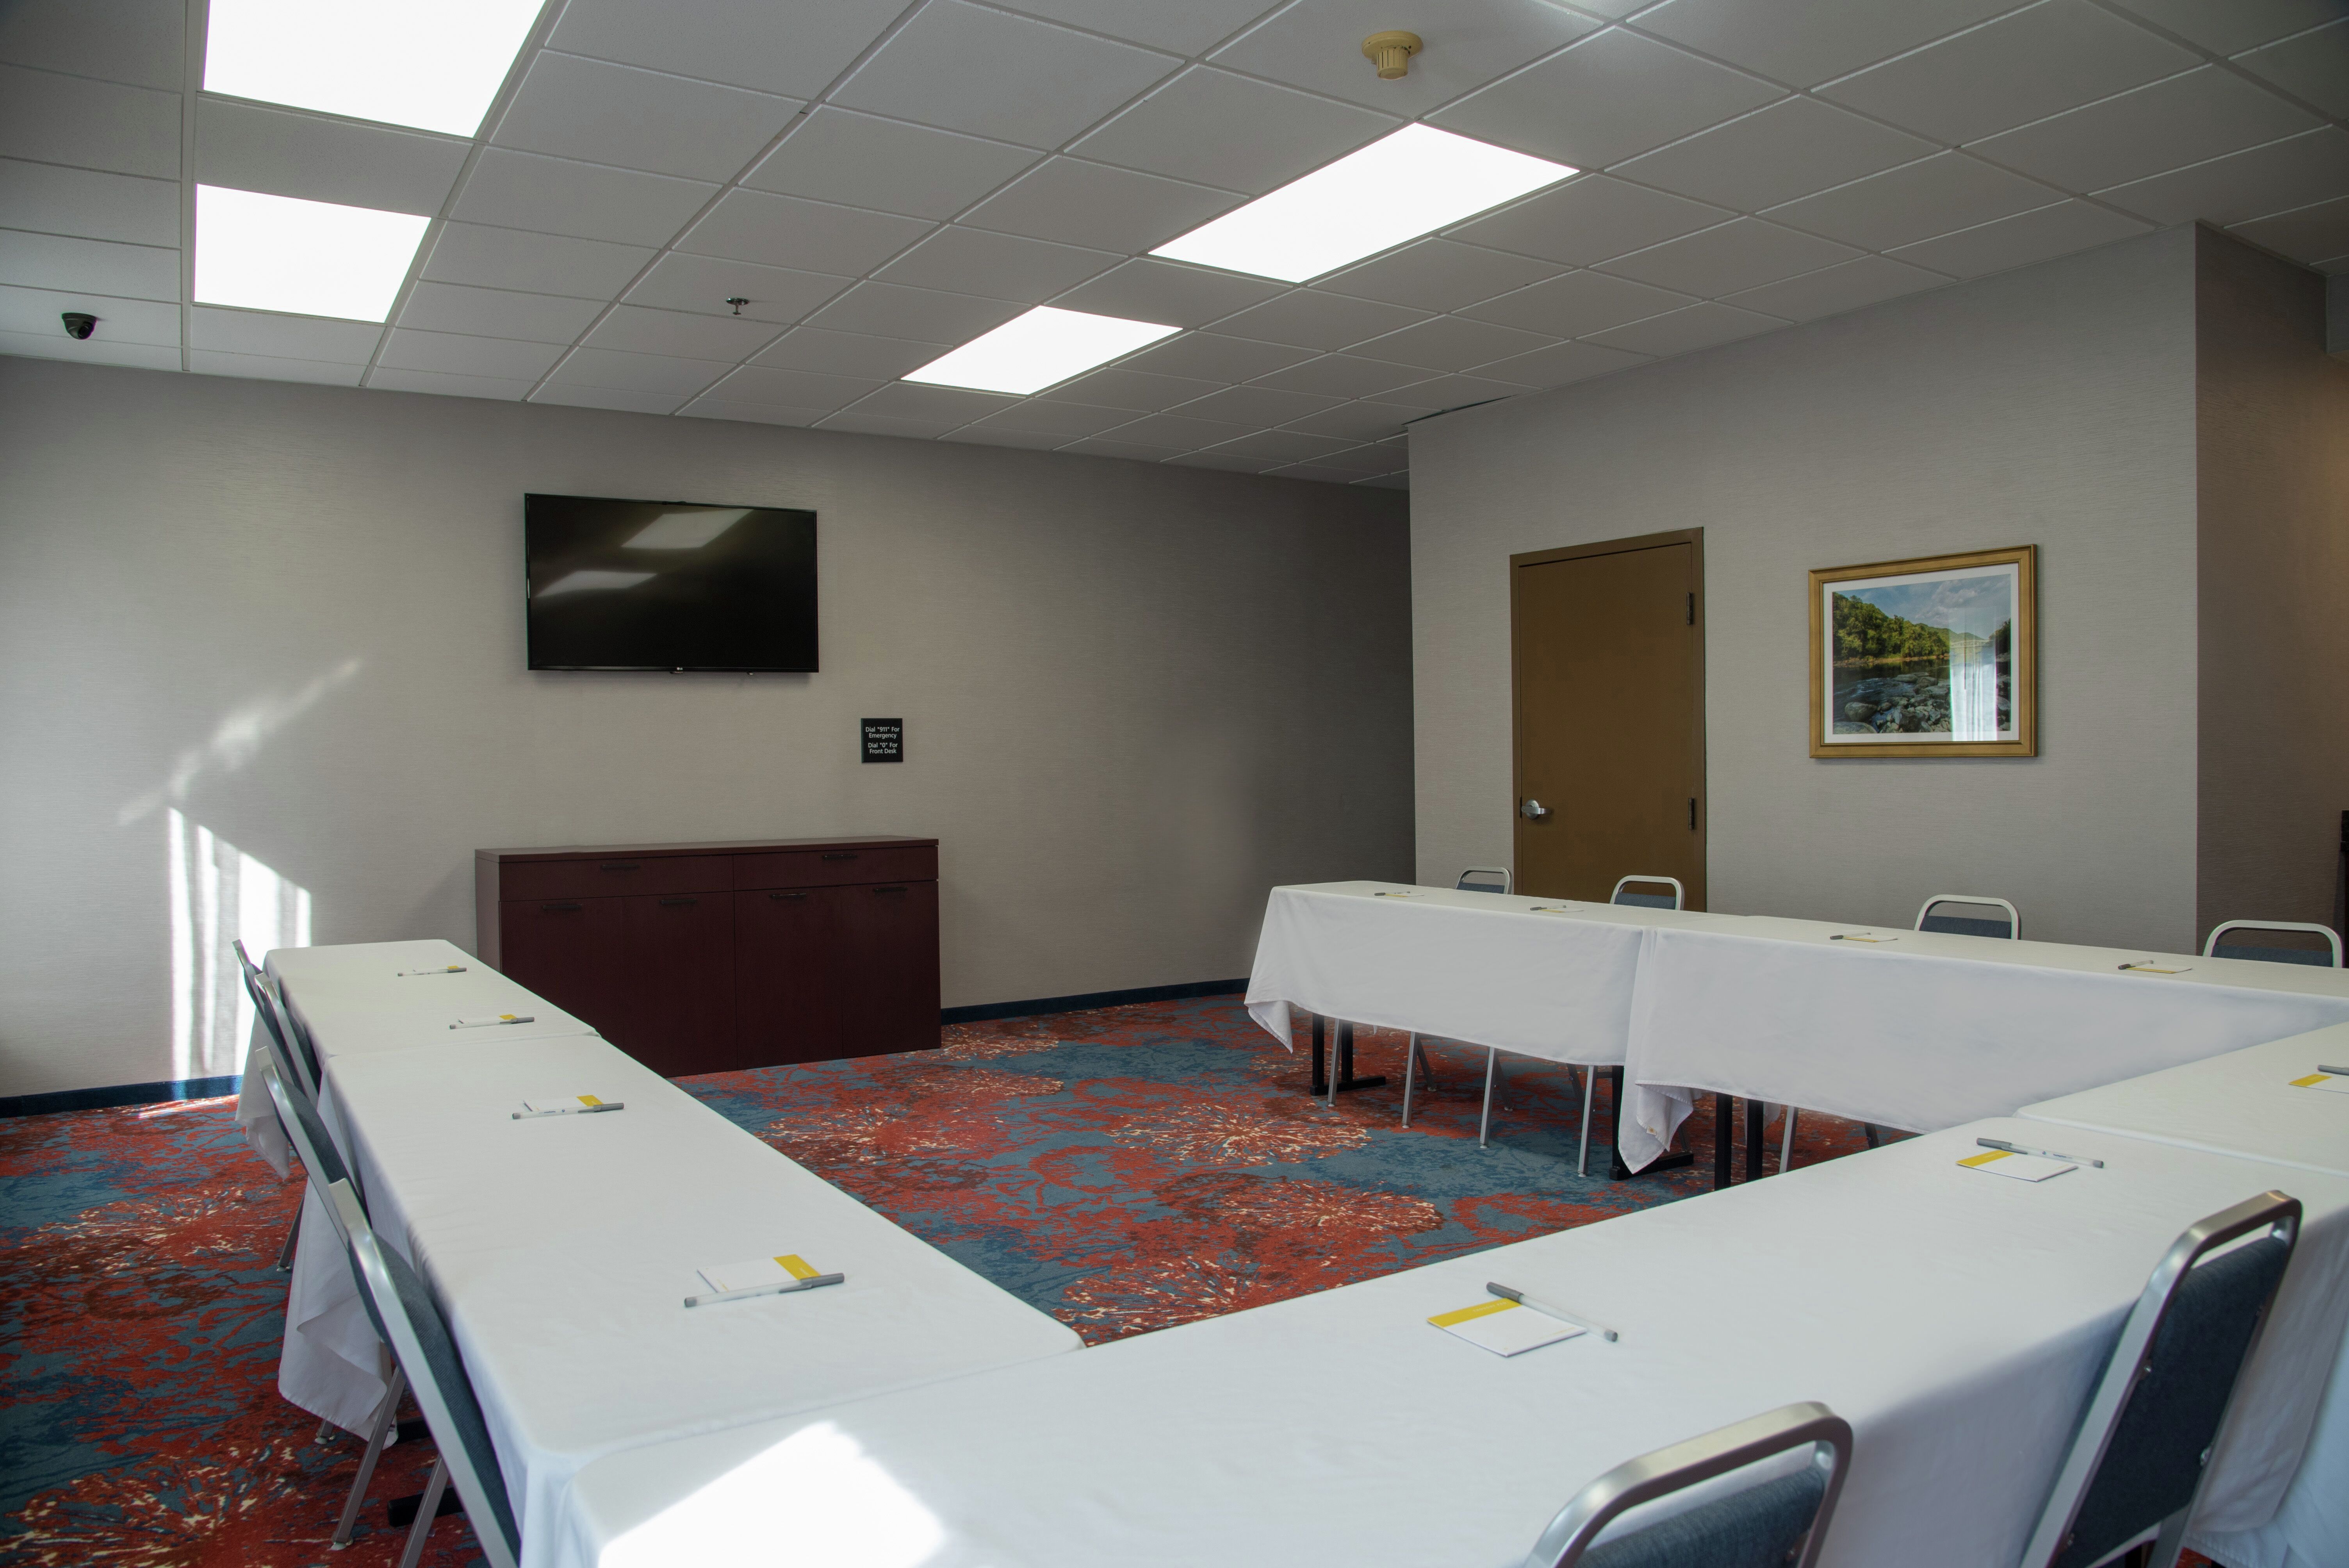 Meeting Room with U-Shaped Table and Room Technology